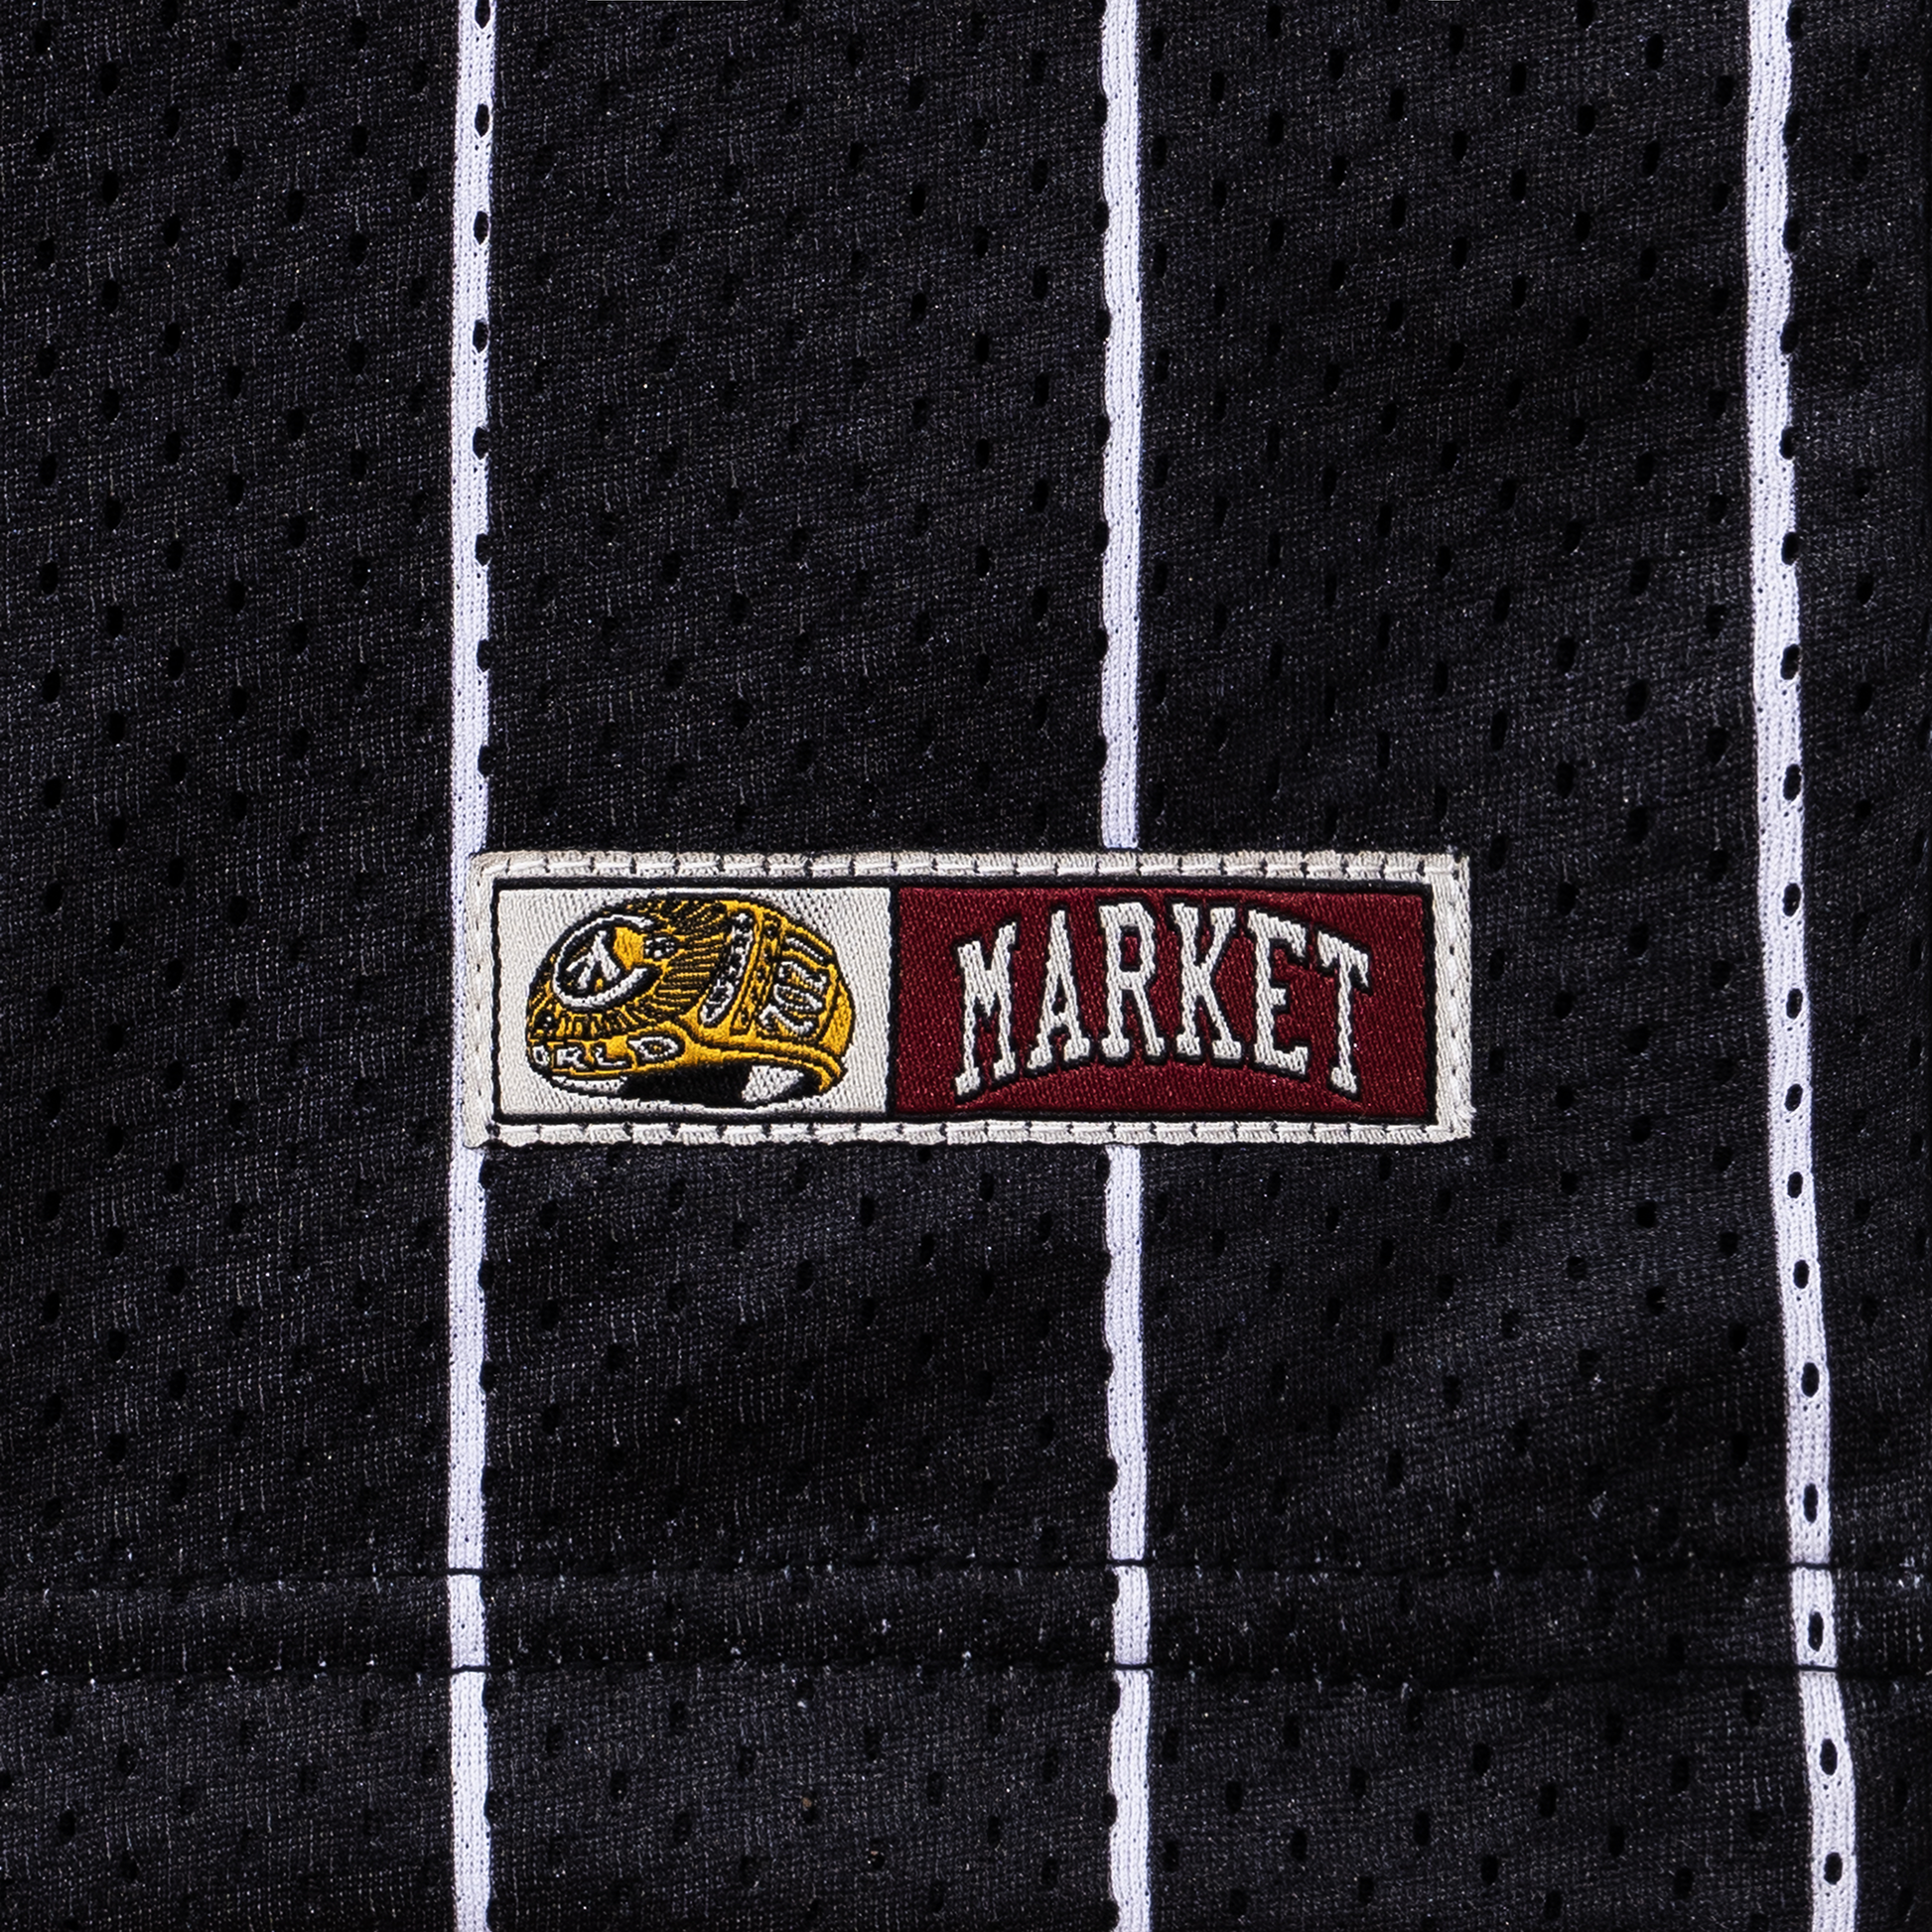 MARKET clothing brand ROSE BOWL JERSEY. Find more basketballs, sporting goods, homegoods and graphic tees at MarketStudios.com. Formally Chinatown Market. 